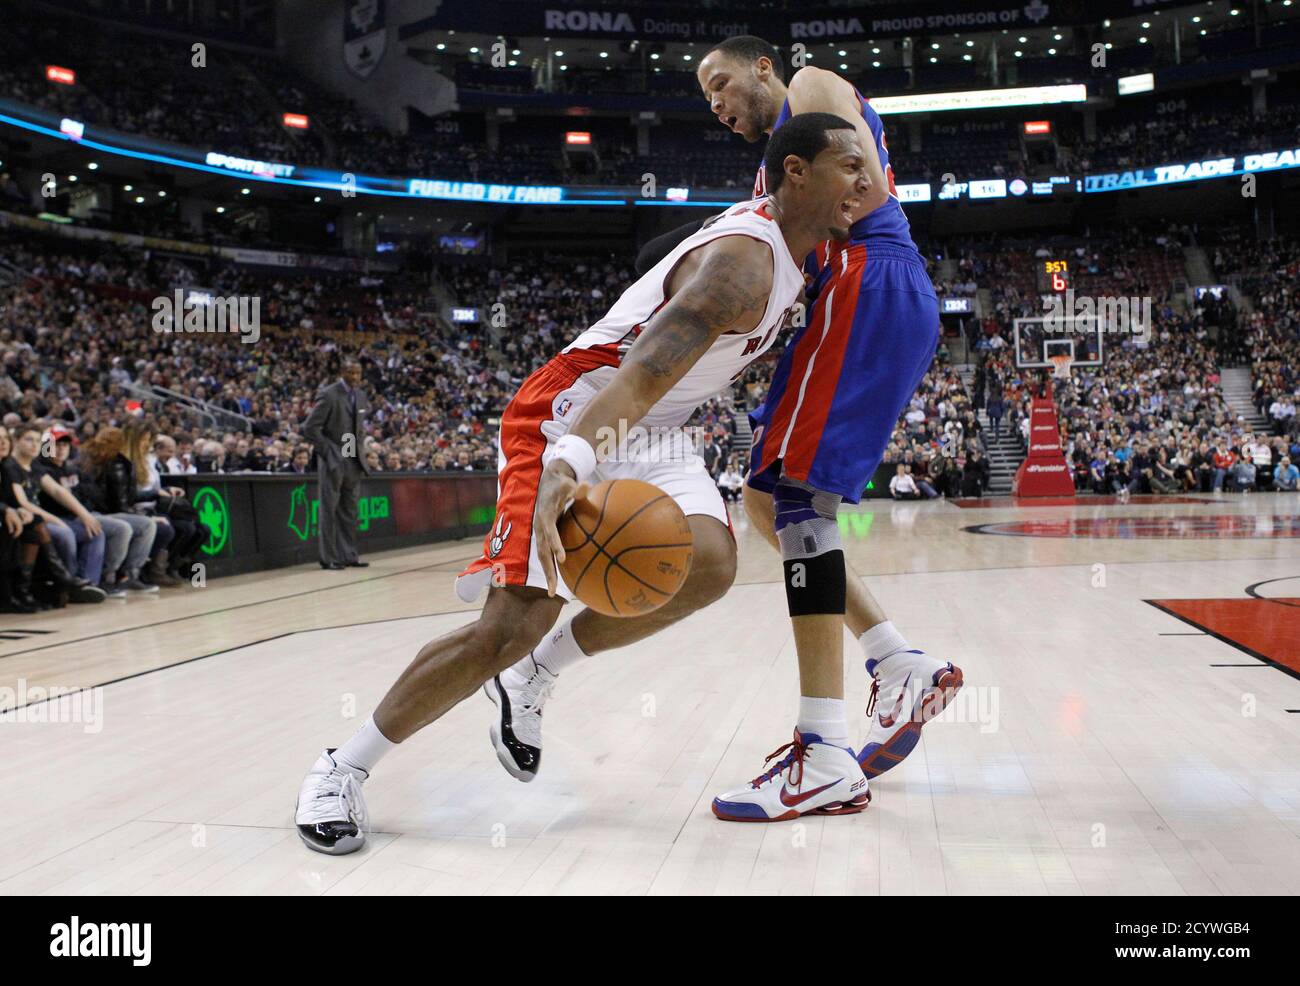 Toronto Raptors' James Johnson goes to the basket against Detroit Pistons'  Tayshaun Prince (R) during the first half of their NBA basketball game in  Toronto, February 22, 2012. REUTERS/Mark Blinch (CANADA -